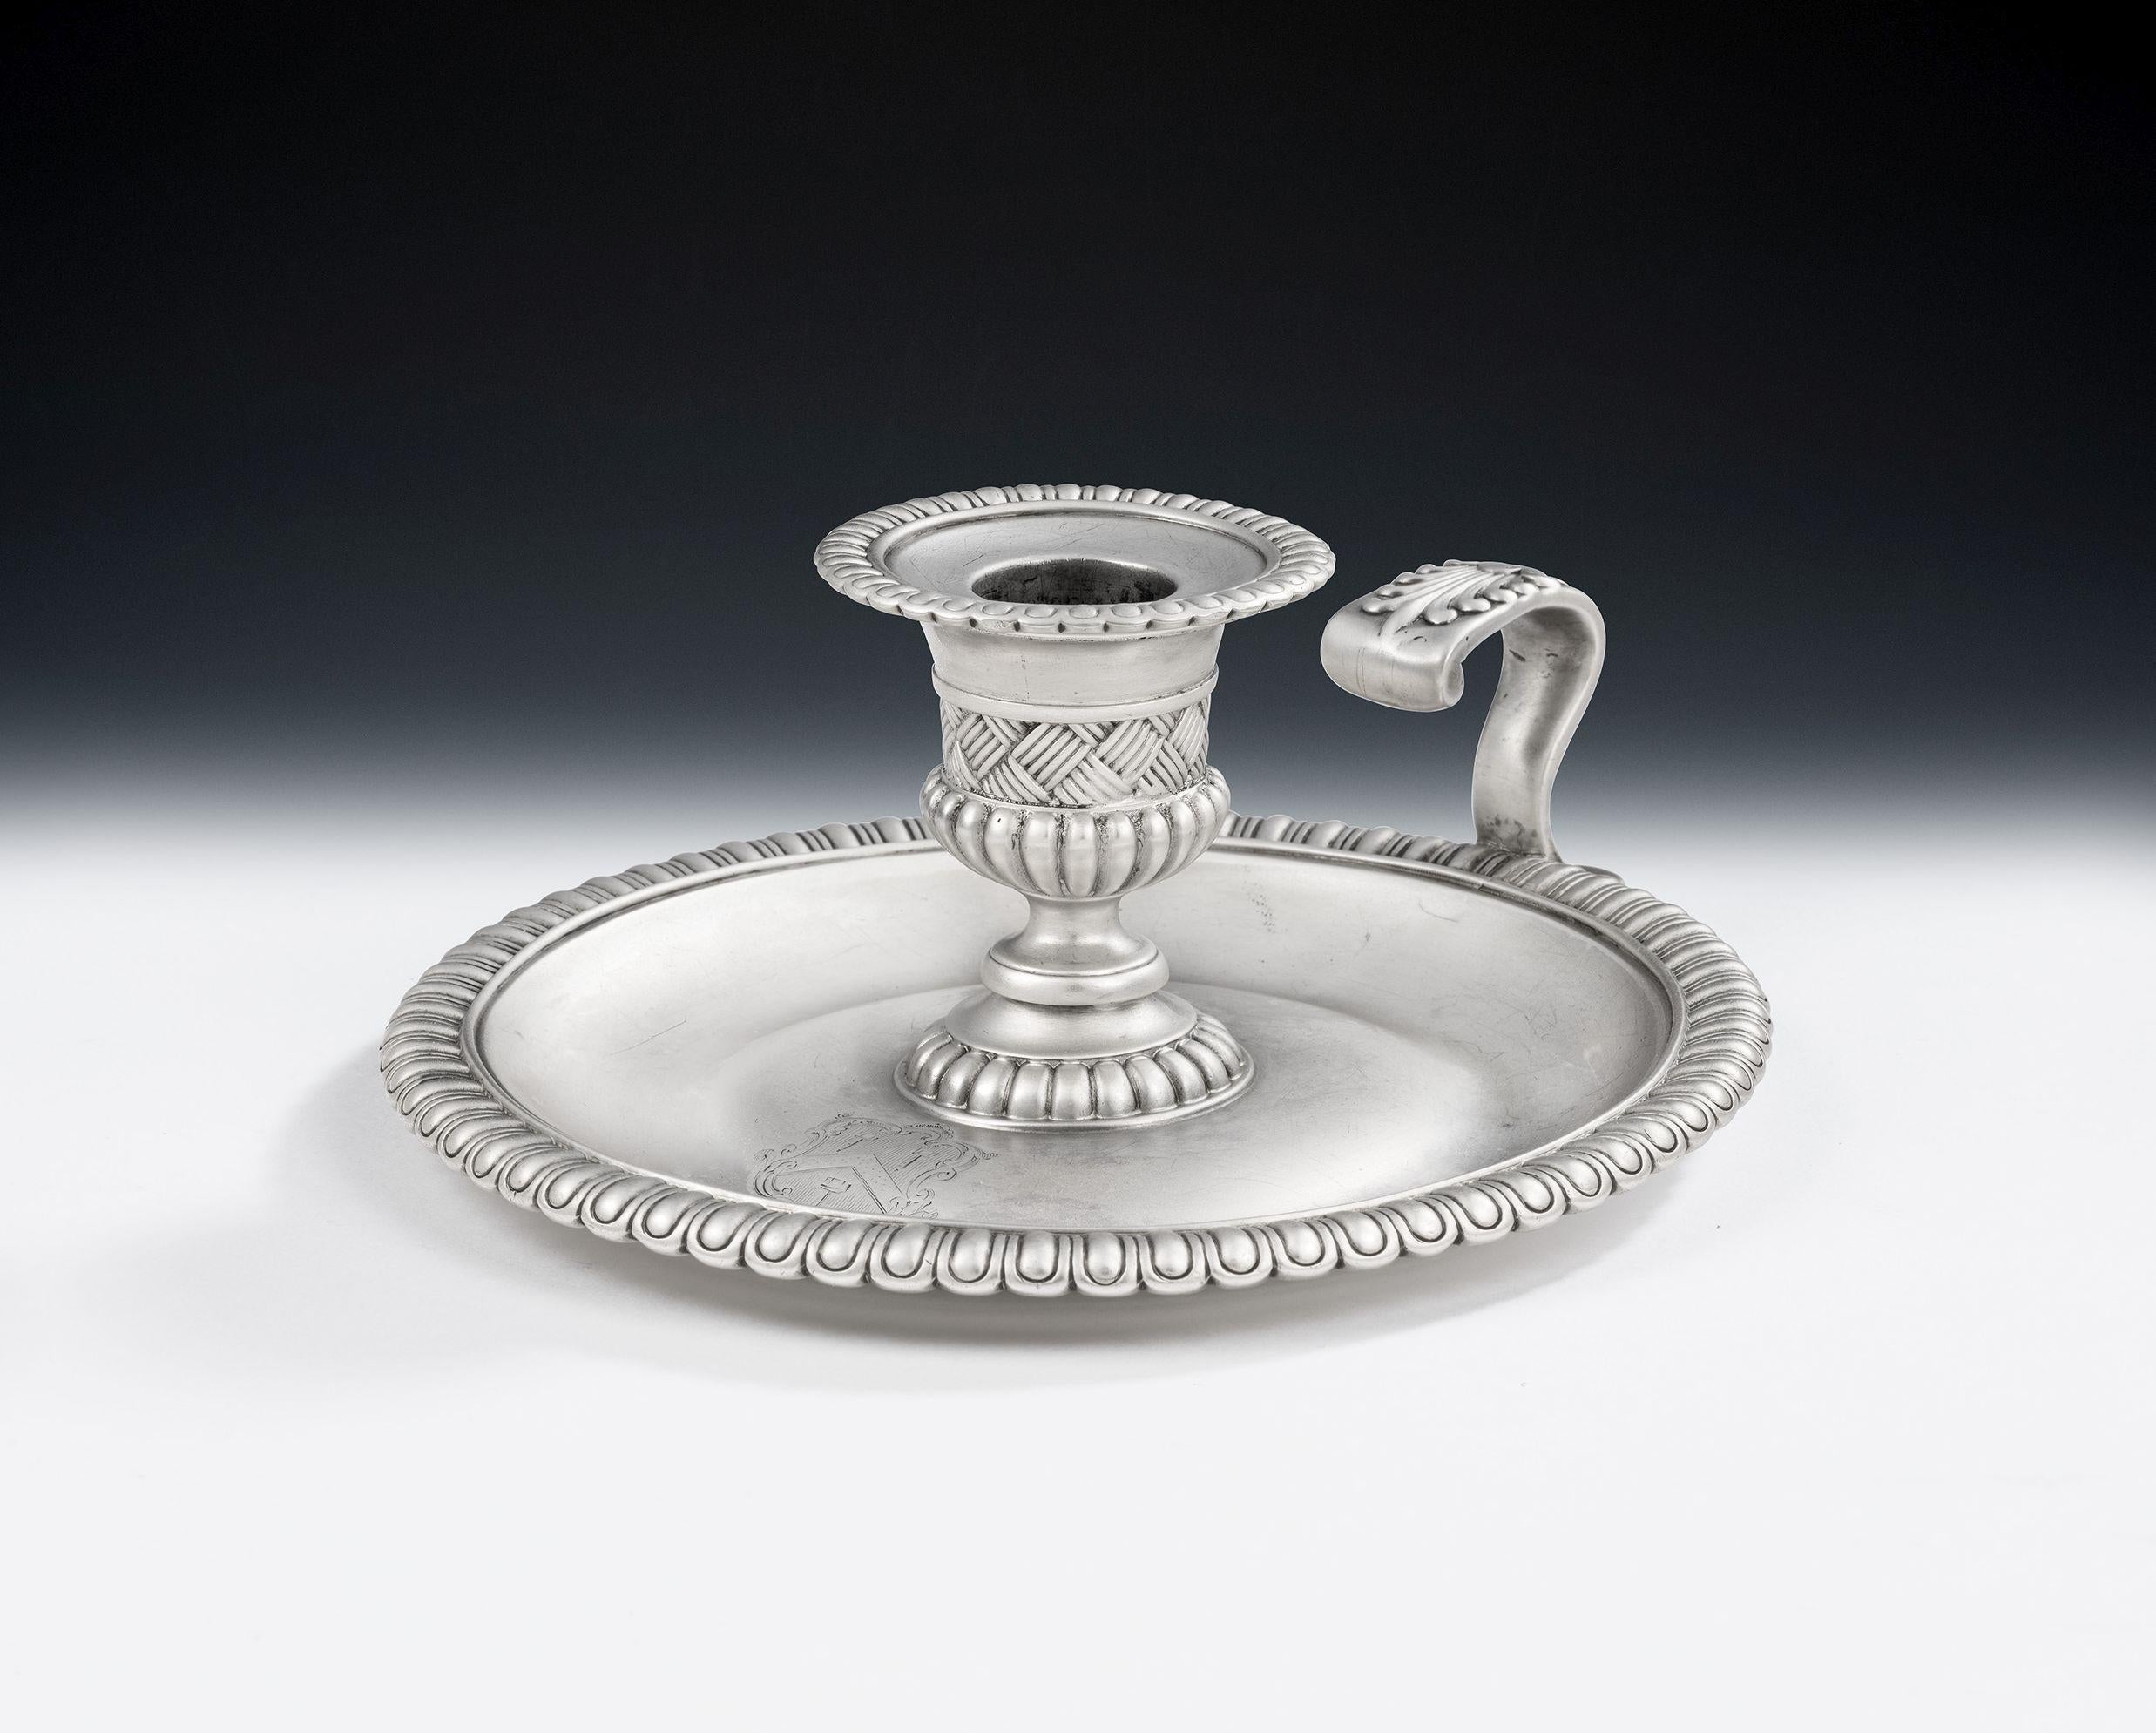 An extremely rare George III Chamberstick made in London in 1815 by Paul Storr.

The Chamberstick is circular in form with a raised outer rim decorated with lobing. The base rises to a baluster shaped section decorated with lobing and reeding and a